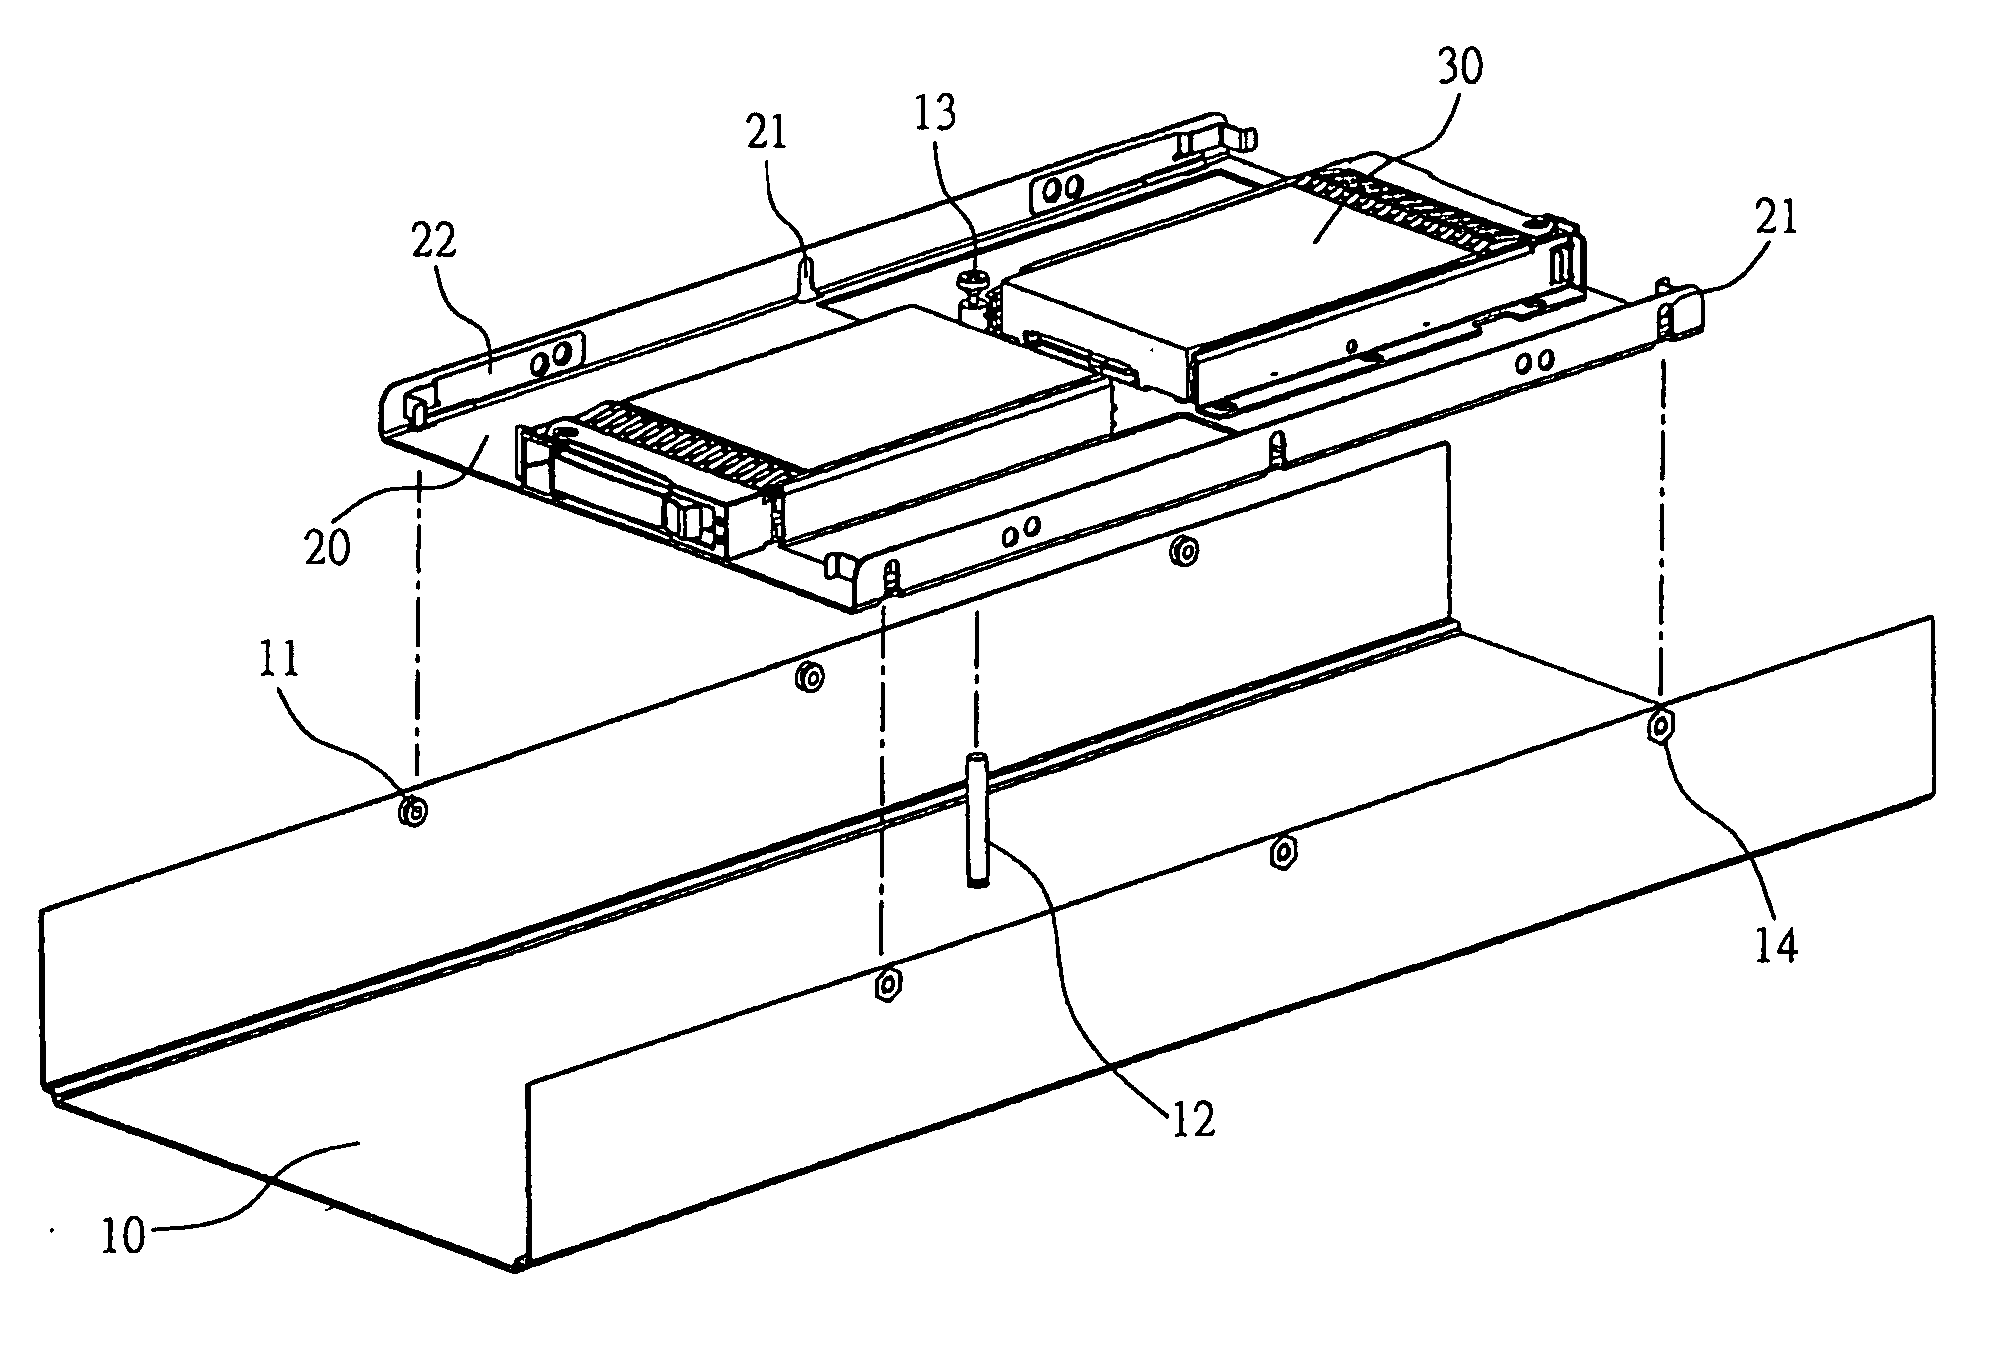 Supporting mechanism for storage drives